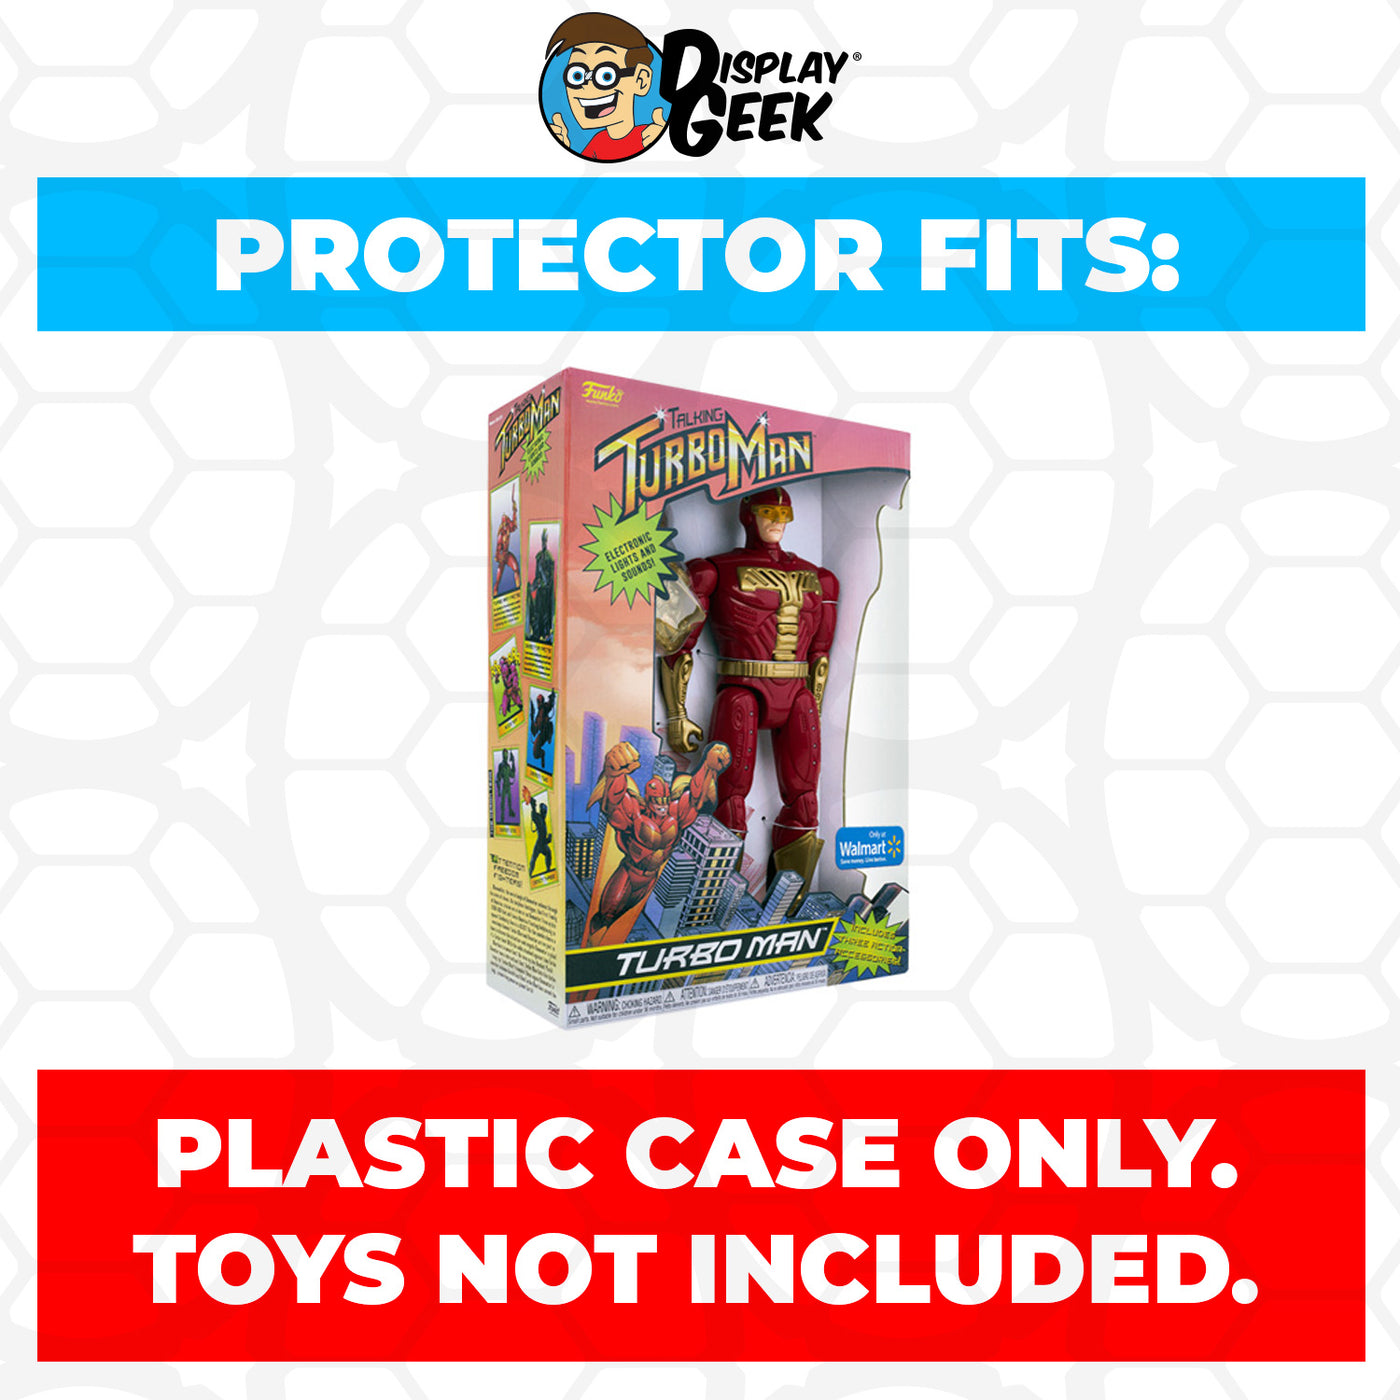 Pop Protector for Talking Turbo Man Action FIgure Funko on The Protector Guide App by Display Geek